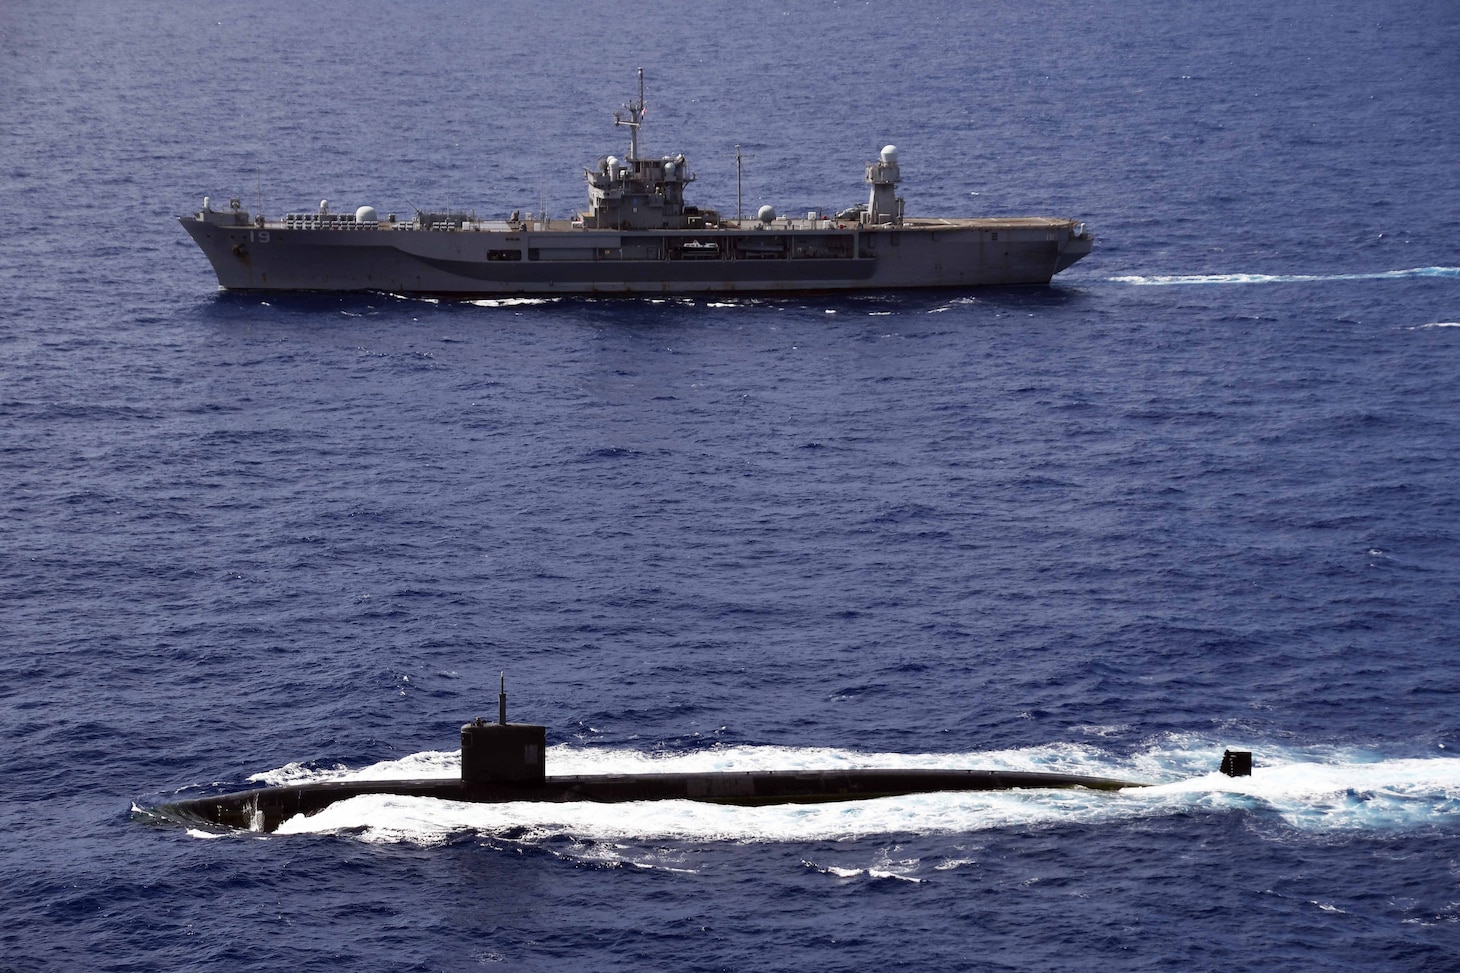 PHILLIPPINE SEA (June 14, 2020) Los Angeles-class fast-attack submarine, USS Asheville (SSN 758), transits alongside U.S. 7th Fleet flagship USS Blue Ridge (LCC 19) during a submarine familiarization (SUBFAM). The SUBFAM was conducted so Blue Ridge's crew and embarked 7th Fleet staff could observe the characteristics of a submarine and how it looks both digitally and visually at periscope depth. Blue Ridge is the oldest operational ship in the Navy, and, as 7th Fleet flagship, actively works to foster relationships with allies and partners in the Indo-Pacific region.